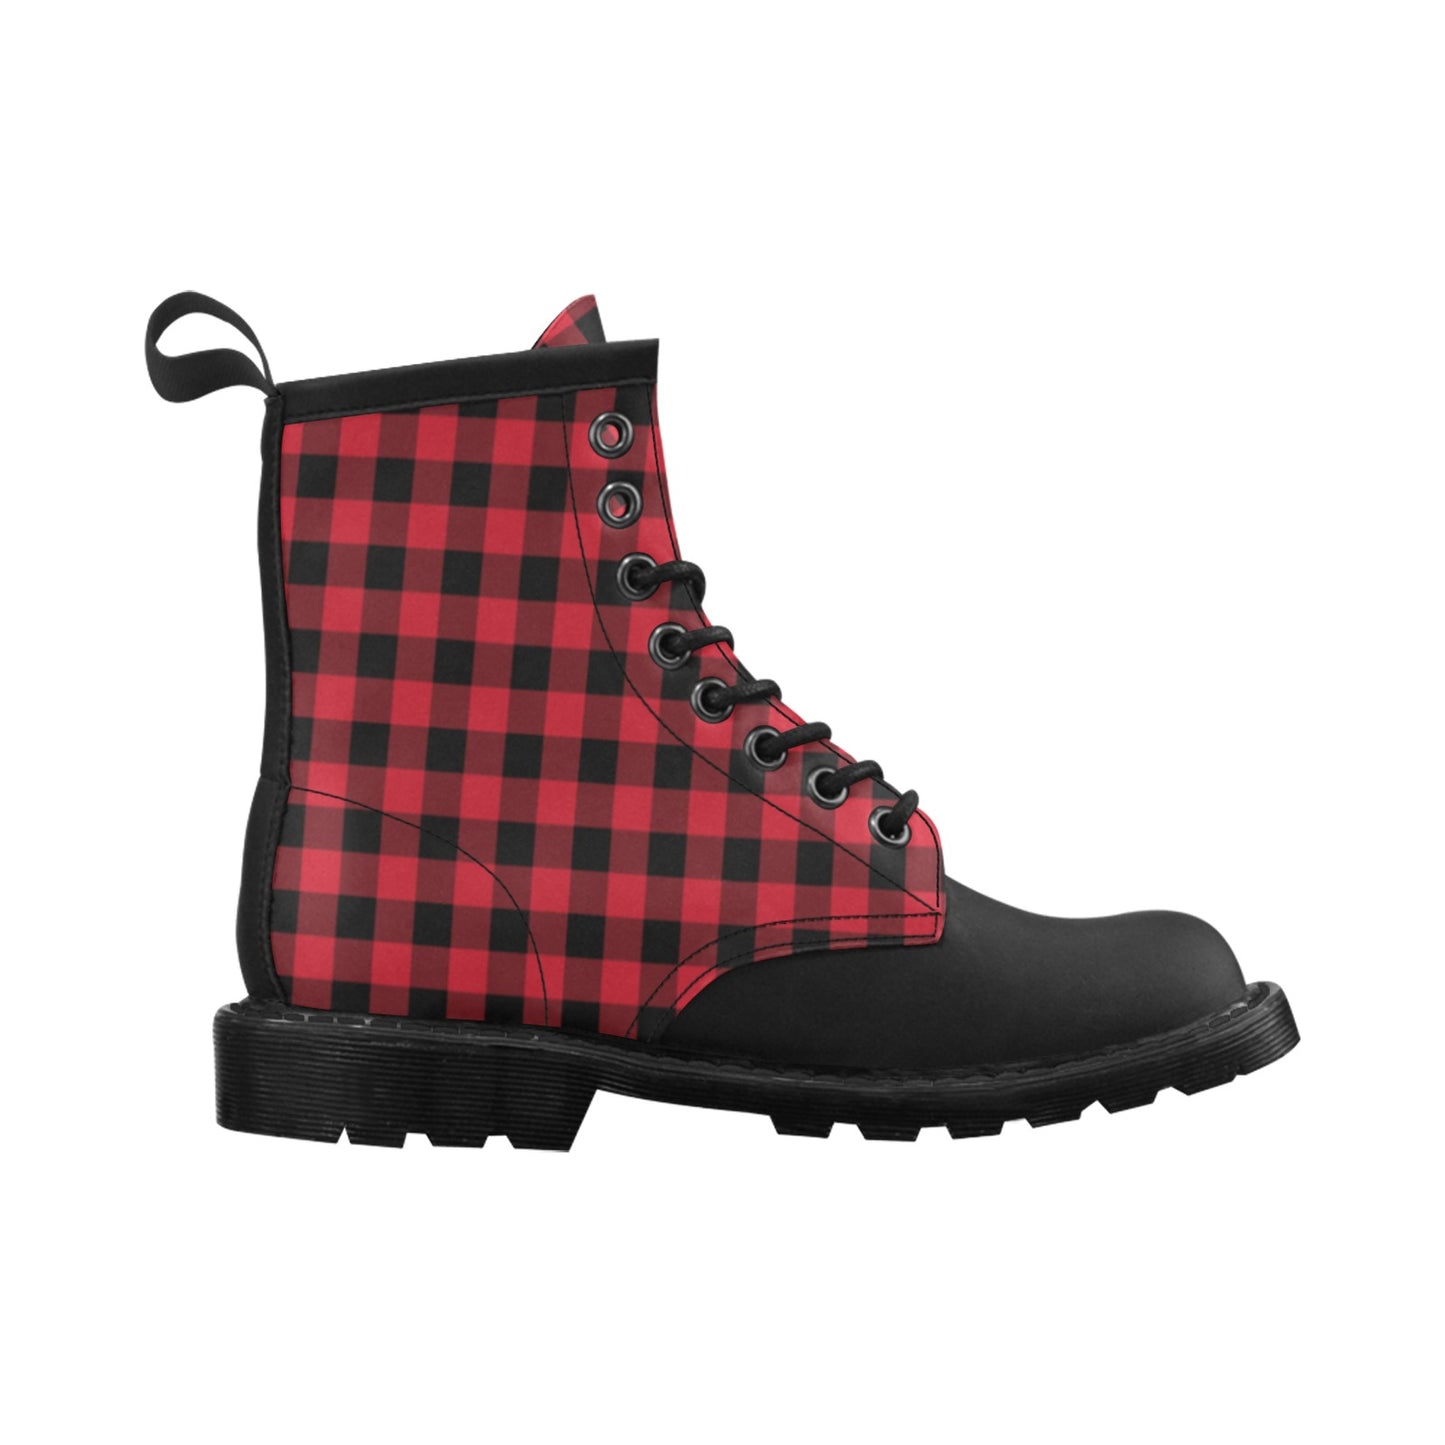 Red Buffalo Plaid Men Leather Boots, Black Check Lumberjack Vegan Leather Lace Up Shoes Hiking Print Ankle Combat Winter Custom